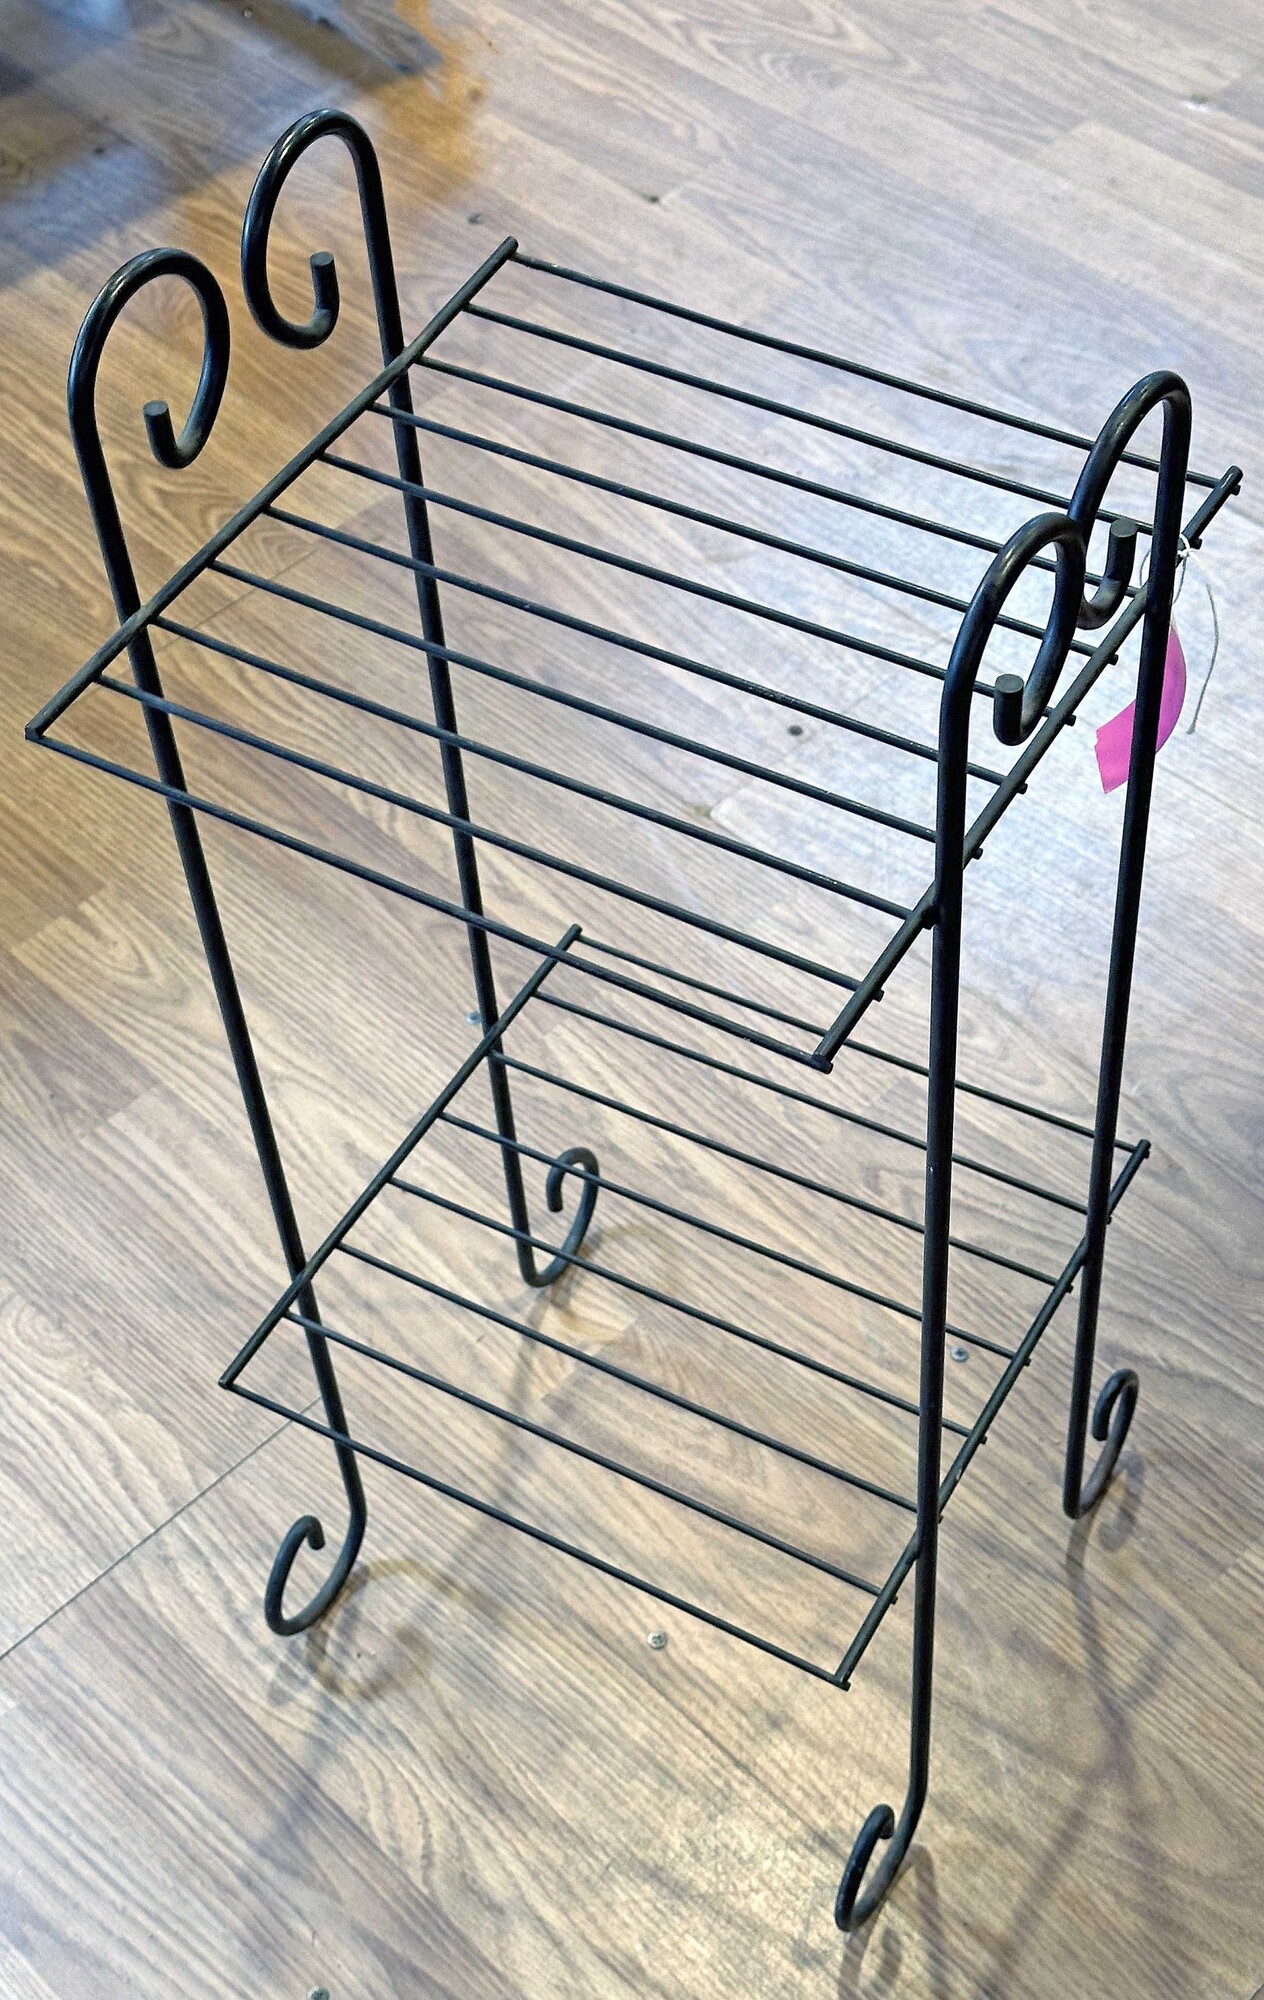 Blk 2 Shelf Iron Stand

2 Shelves
27 In Tall X  11 In Square